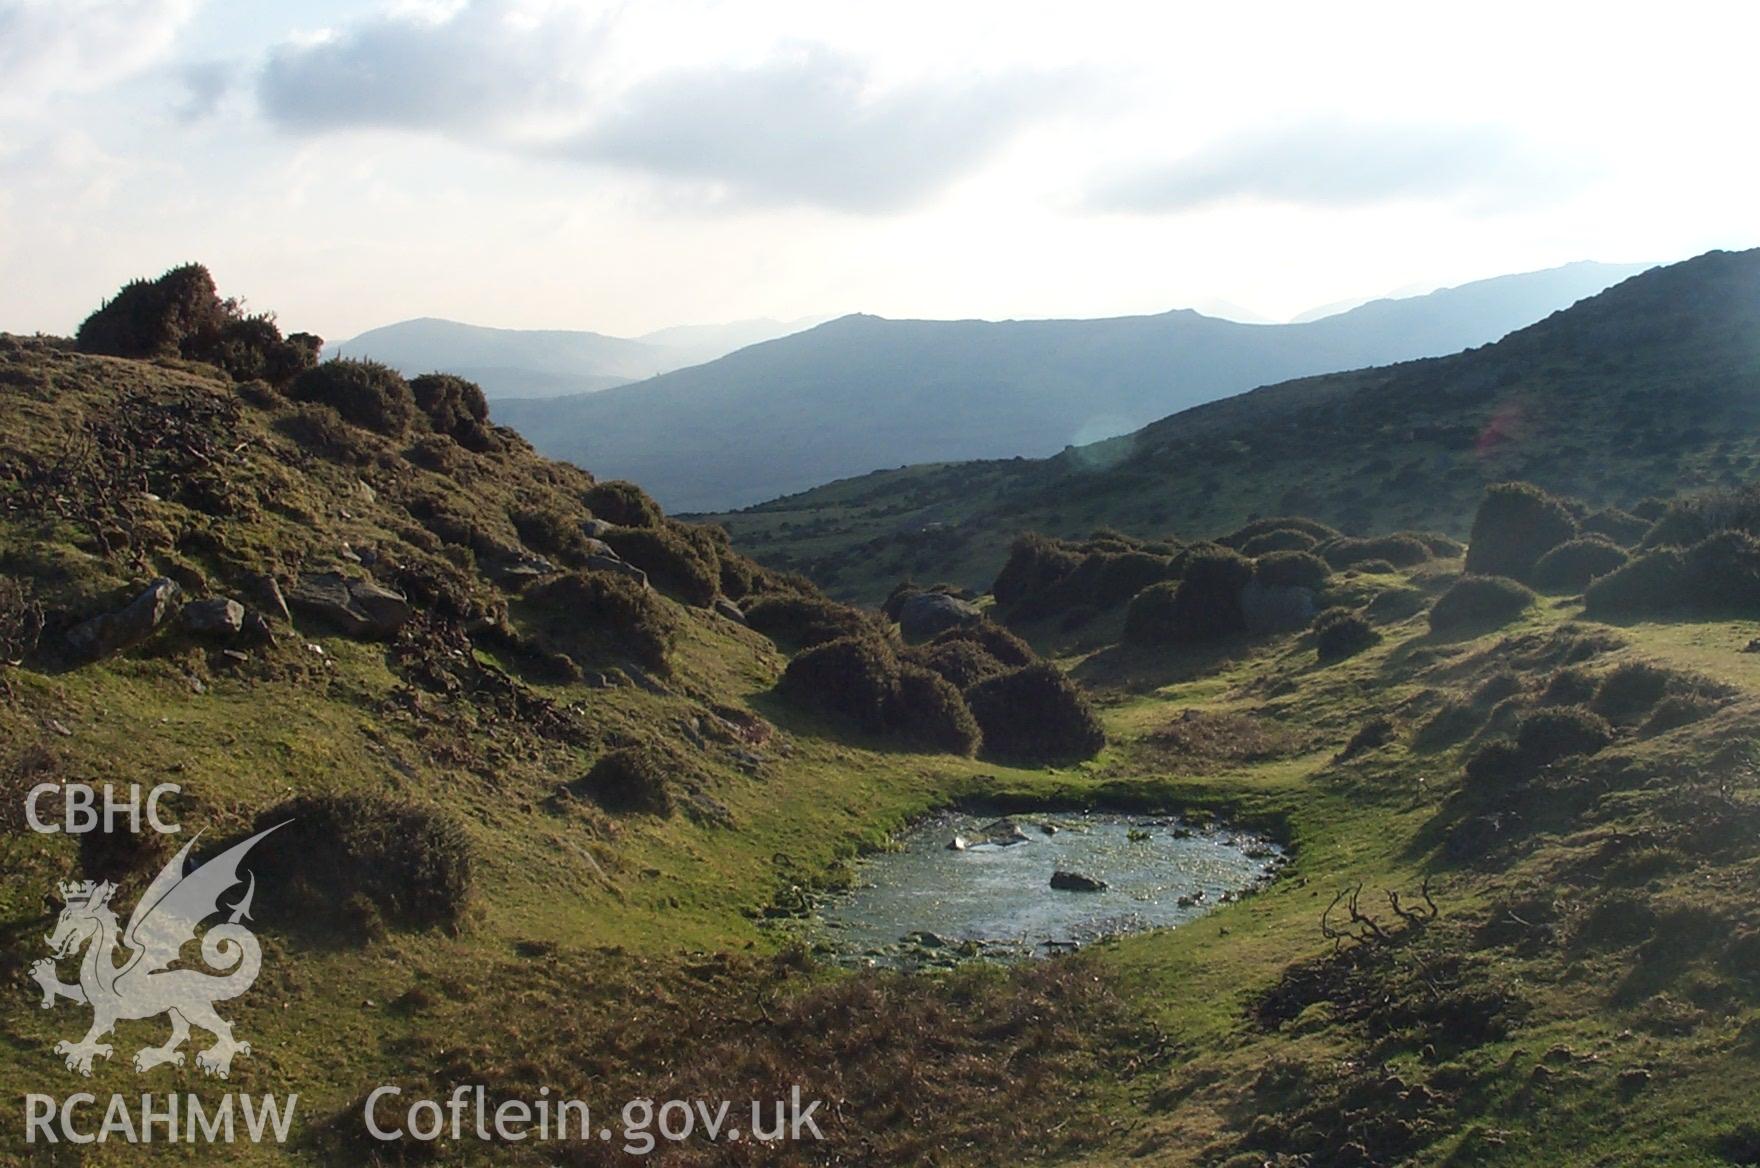 Digital photograph of Caer Bach Hillfort from the South. Taken by P. Schofield on 30/03/2004 during the Eastern Snowdonia (North) Upland Survey.